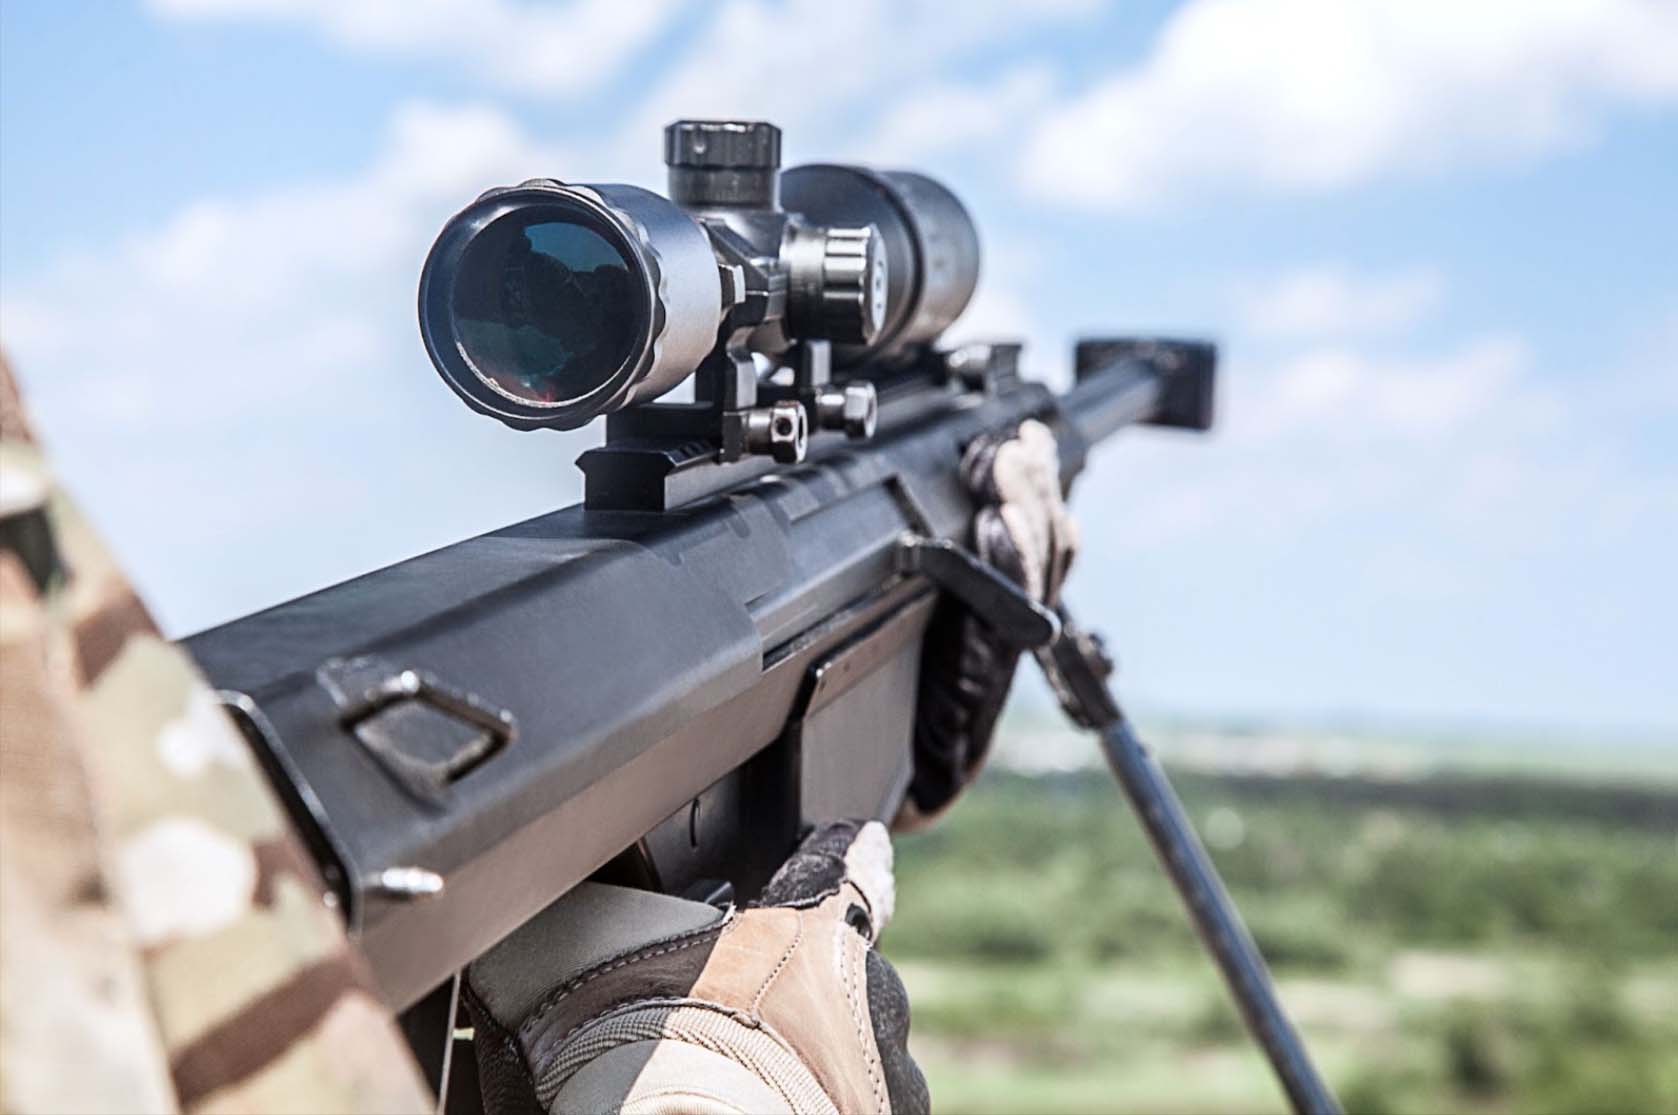 A detailed close-up of a military sniper rifle, showcasing the attached scope prominently for precision targeting.